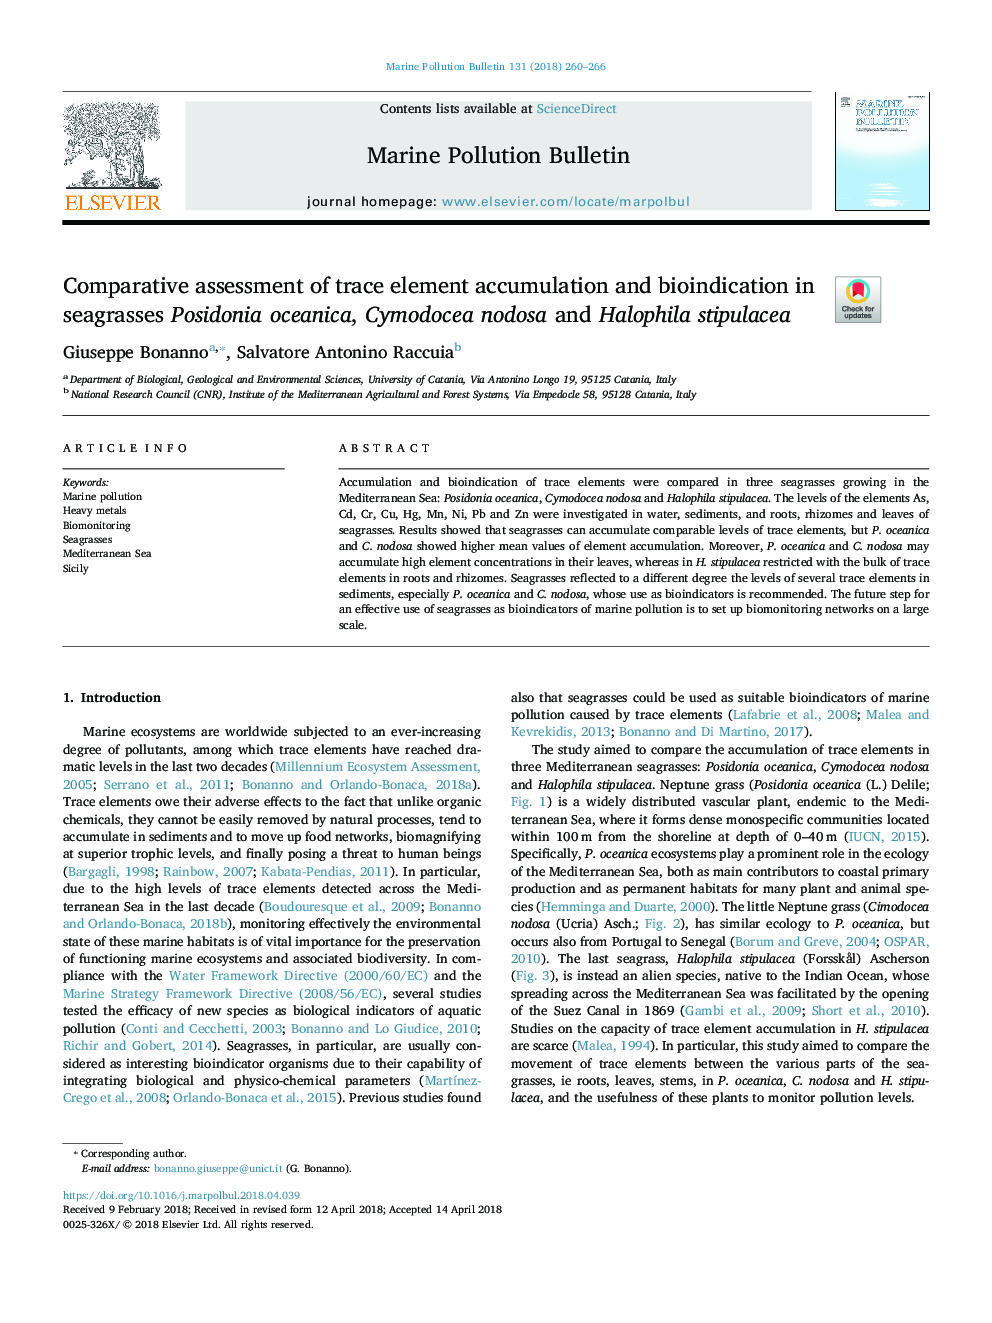 Comparative assessment of trace element accumulation and bioindication in seagrasses Posidonia oceanica, Cymodocea nodosa and Halophila stipulacea